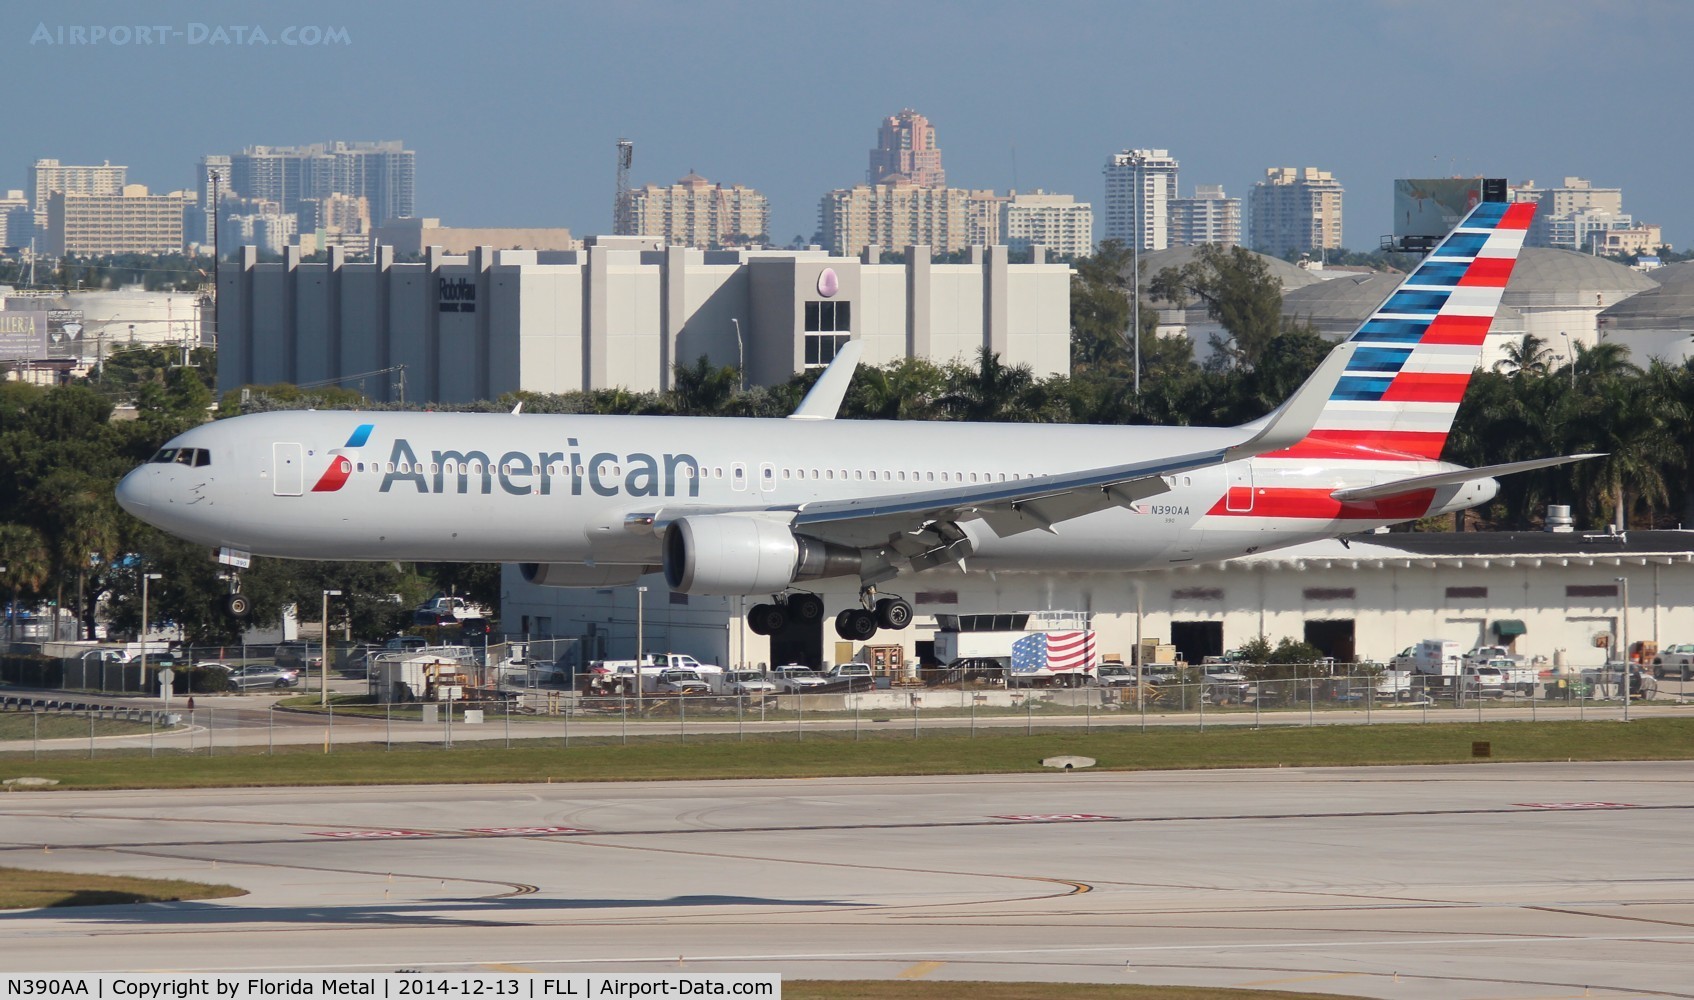 N390AA, 1995 Boeing 767-323 C/N 27450, American picking up the Miami Dolphins